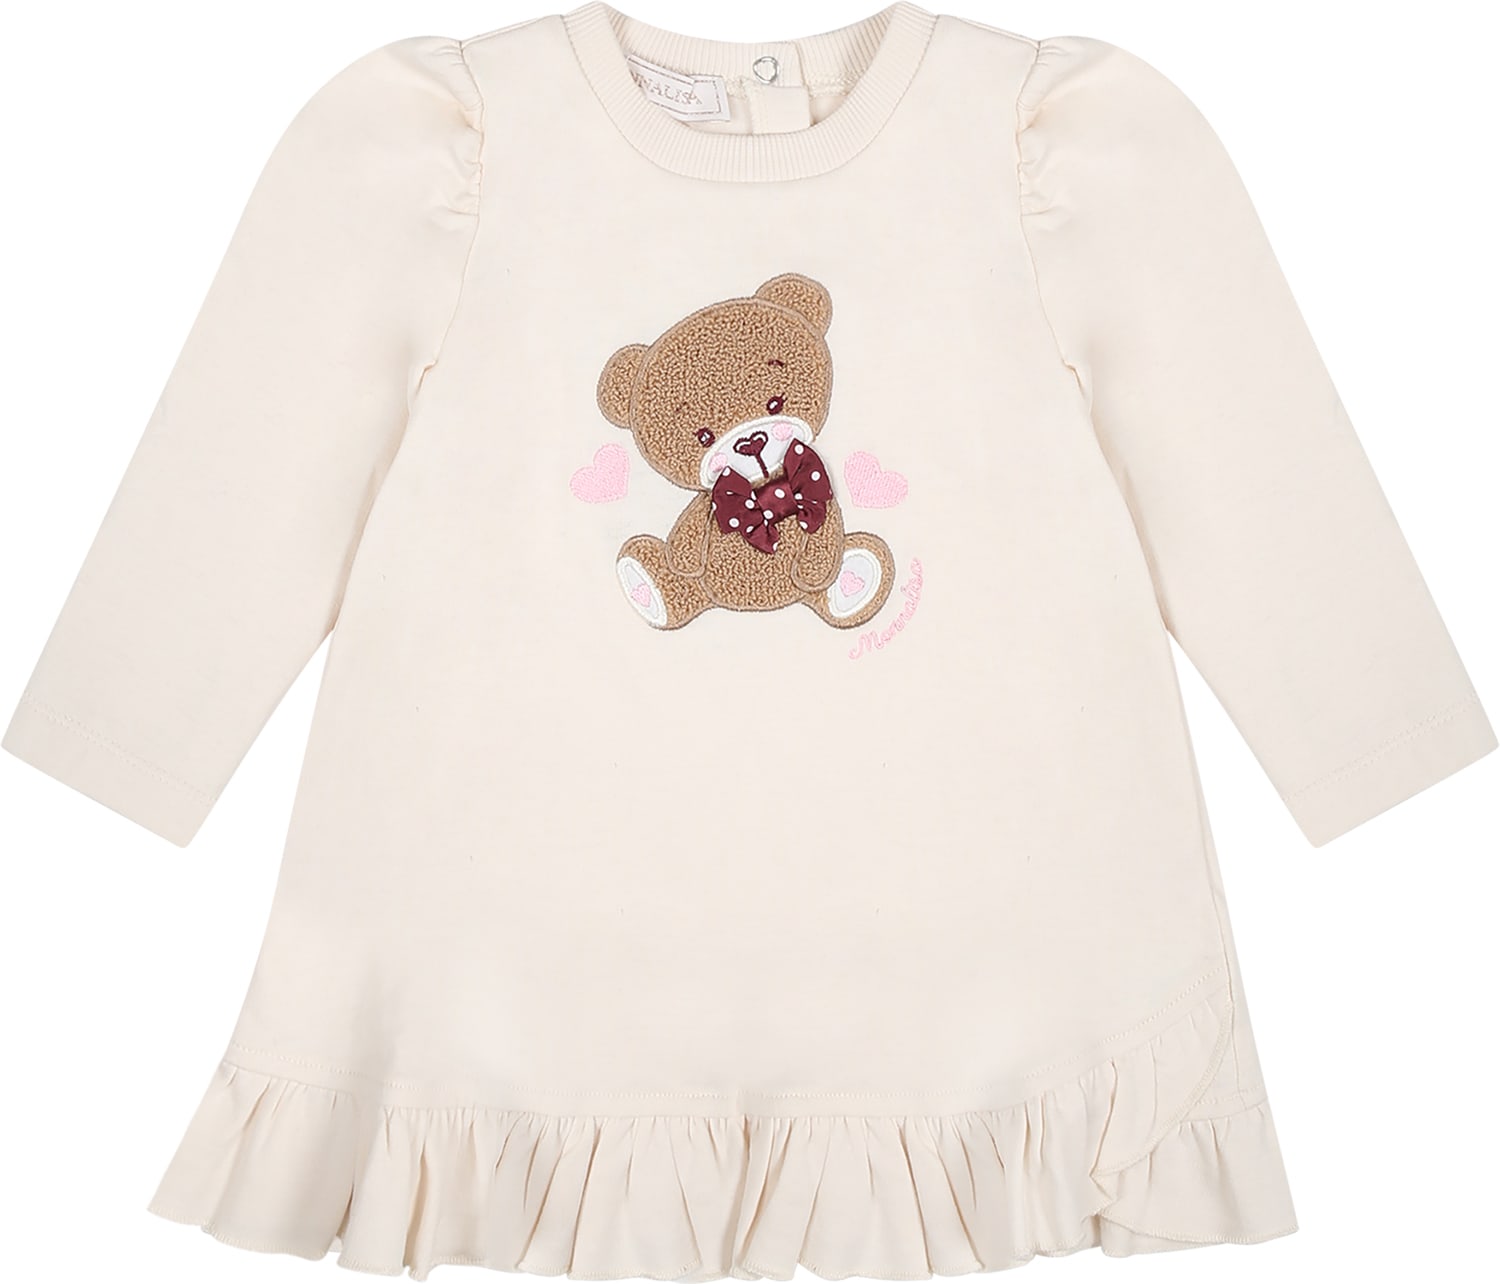 Monnalisa Beige Dress For Baby Girl With Bear